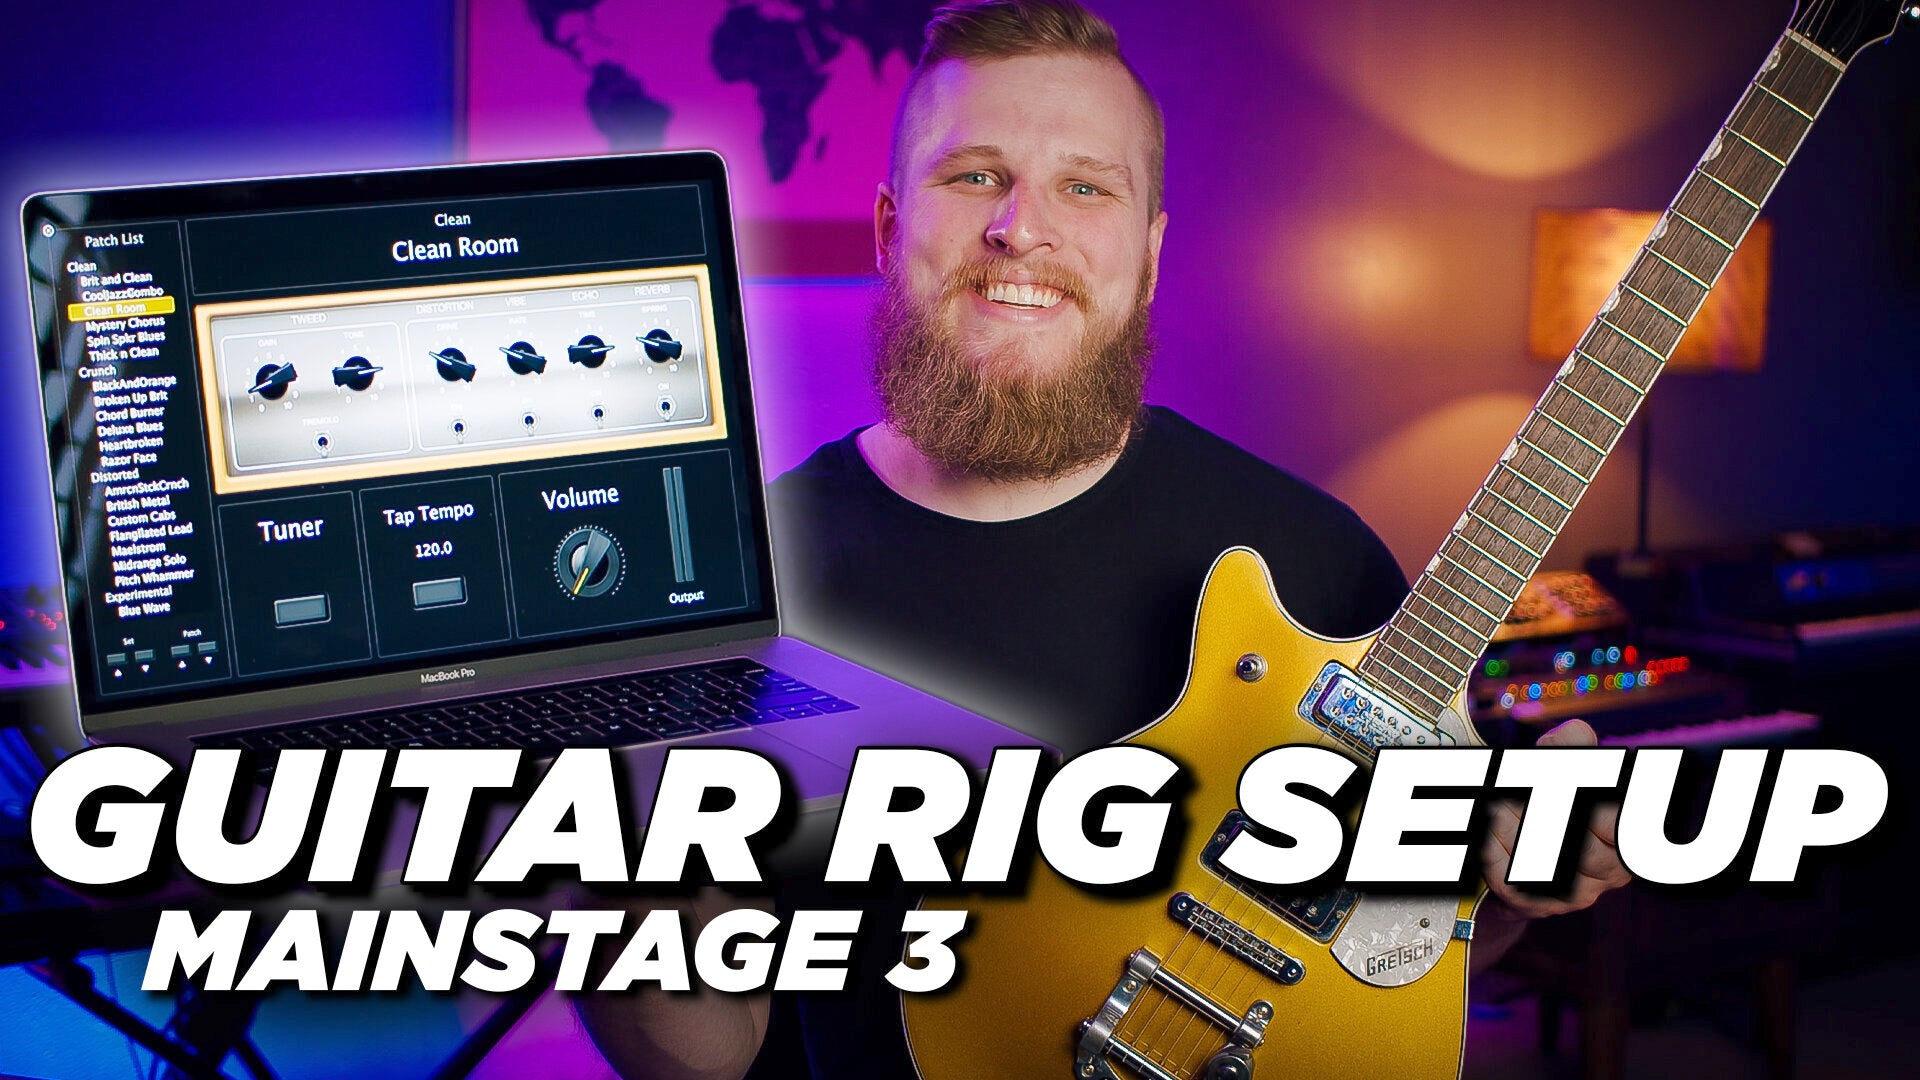 How to Play Your Guitar through MainStage